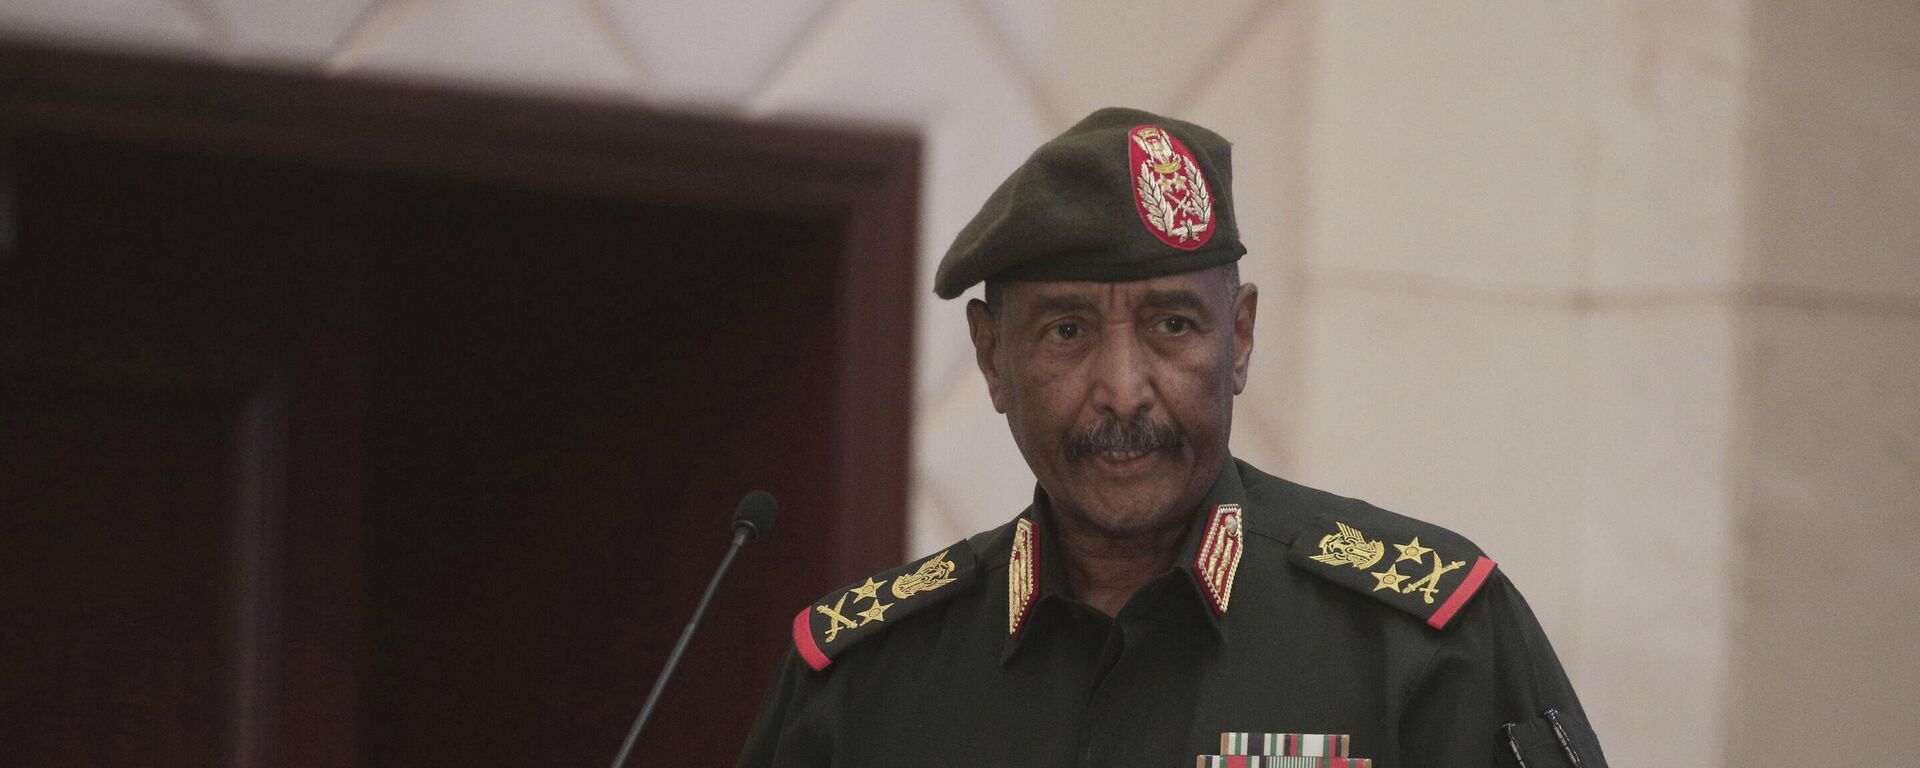 Sudan's Army chief Gen. Abdel-Fattah Burhan speaks following the signature of an initial deal aimed at ending a deep crisis caused by last year's military coup, in Khartoum, Sudan, Dec. 5, 2022 - Sputnik International, 1920, 27.04.2023